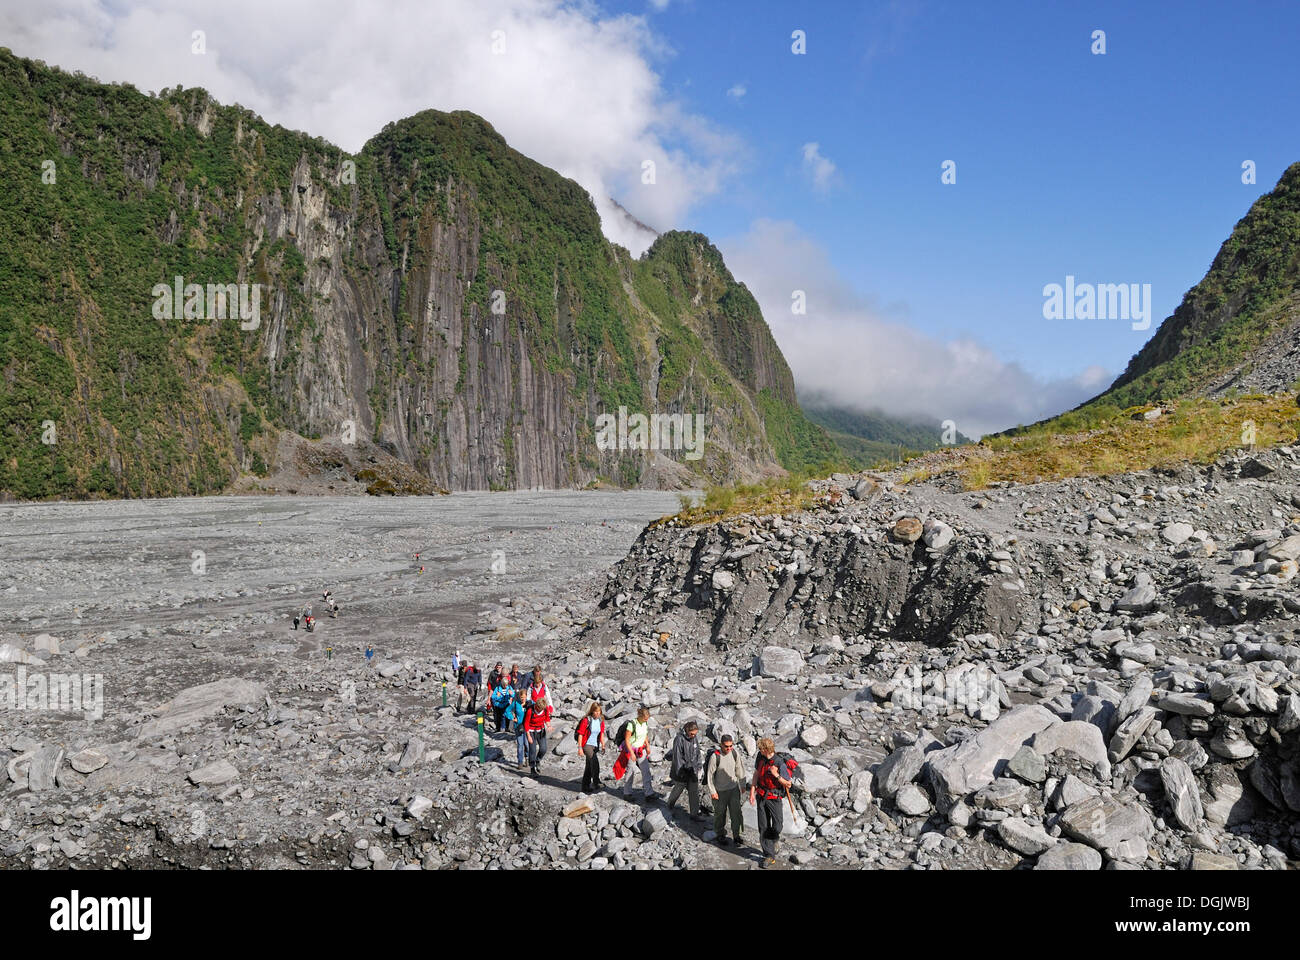 Guided group of tourists on their way to Fox Glacier, South Island, New Zealand Stock Photo